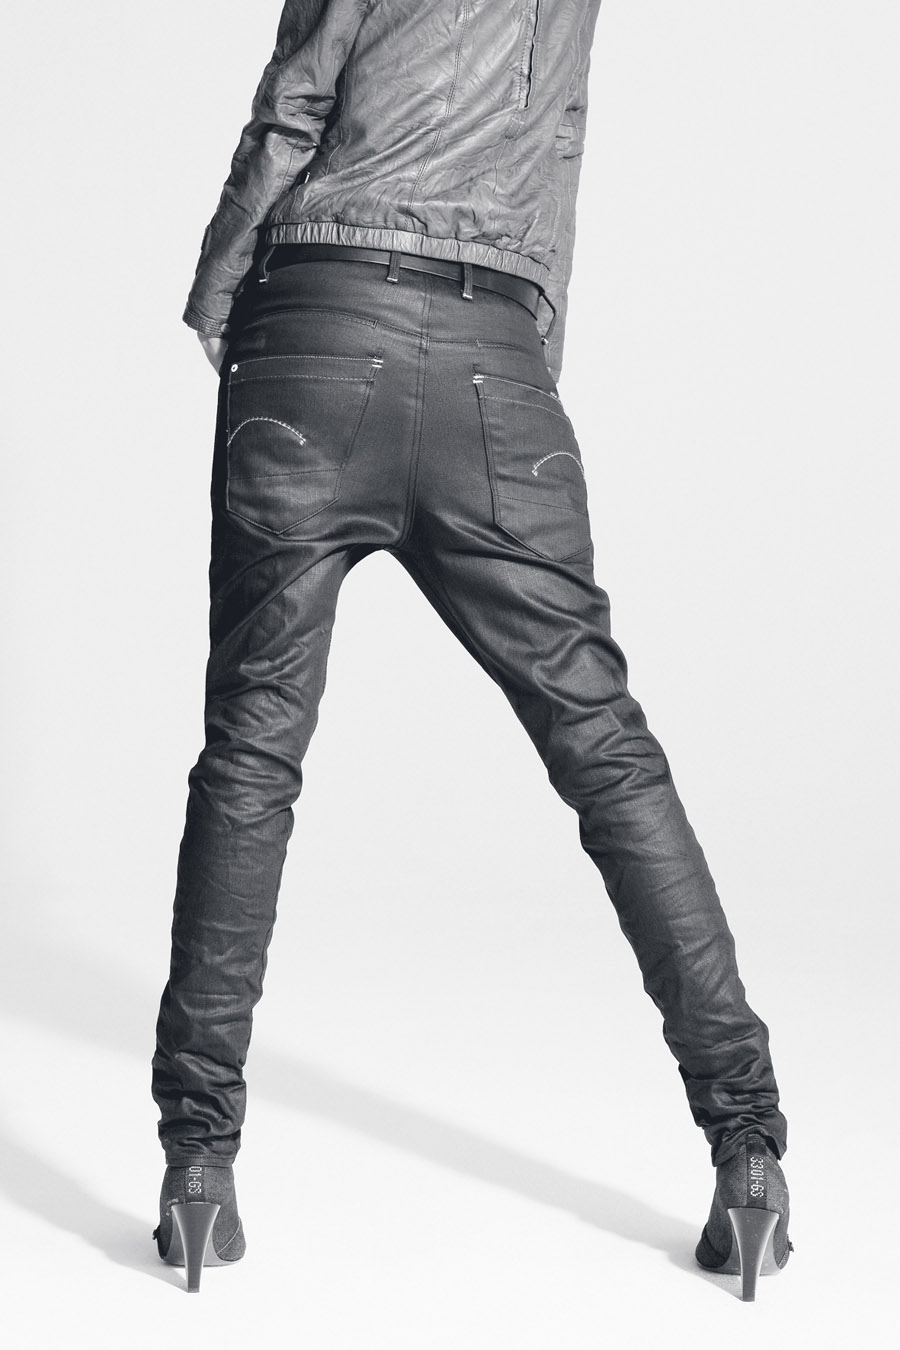 G-Star Raw Low-T Collection: Cool, Sophisticated and Controlled